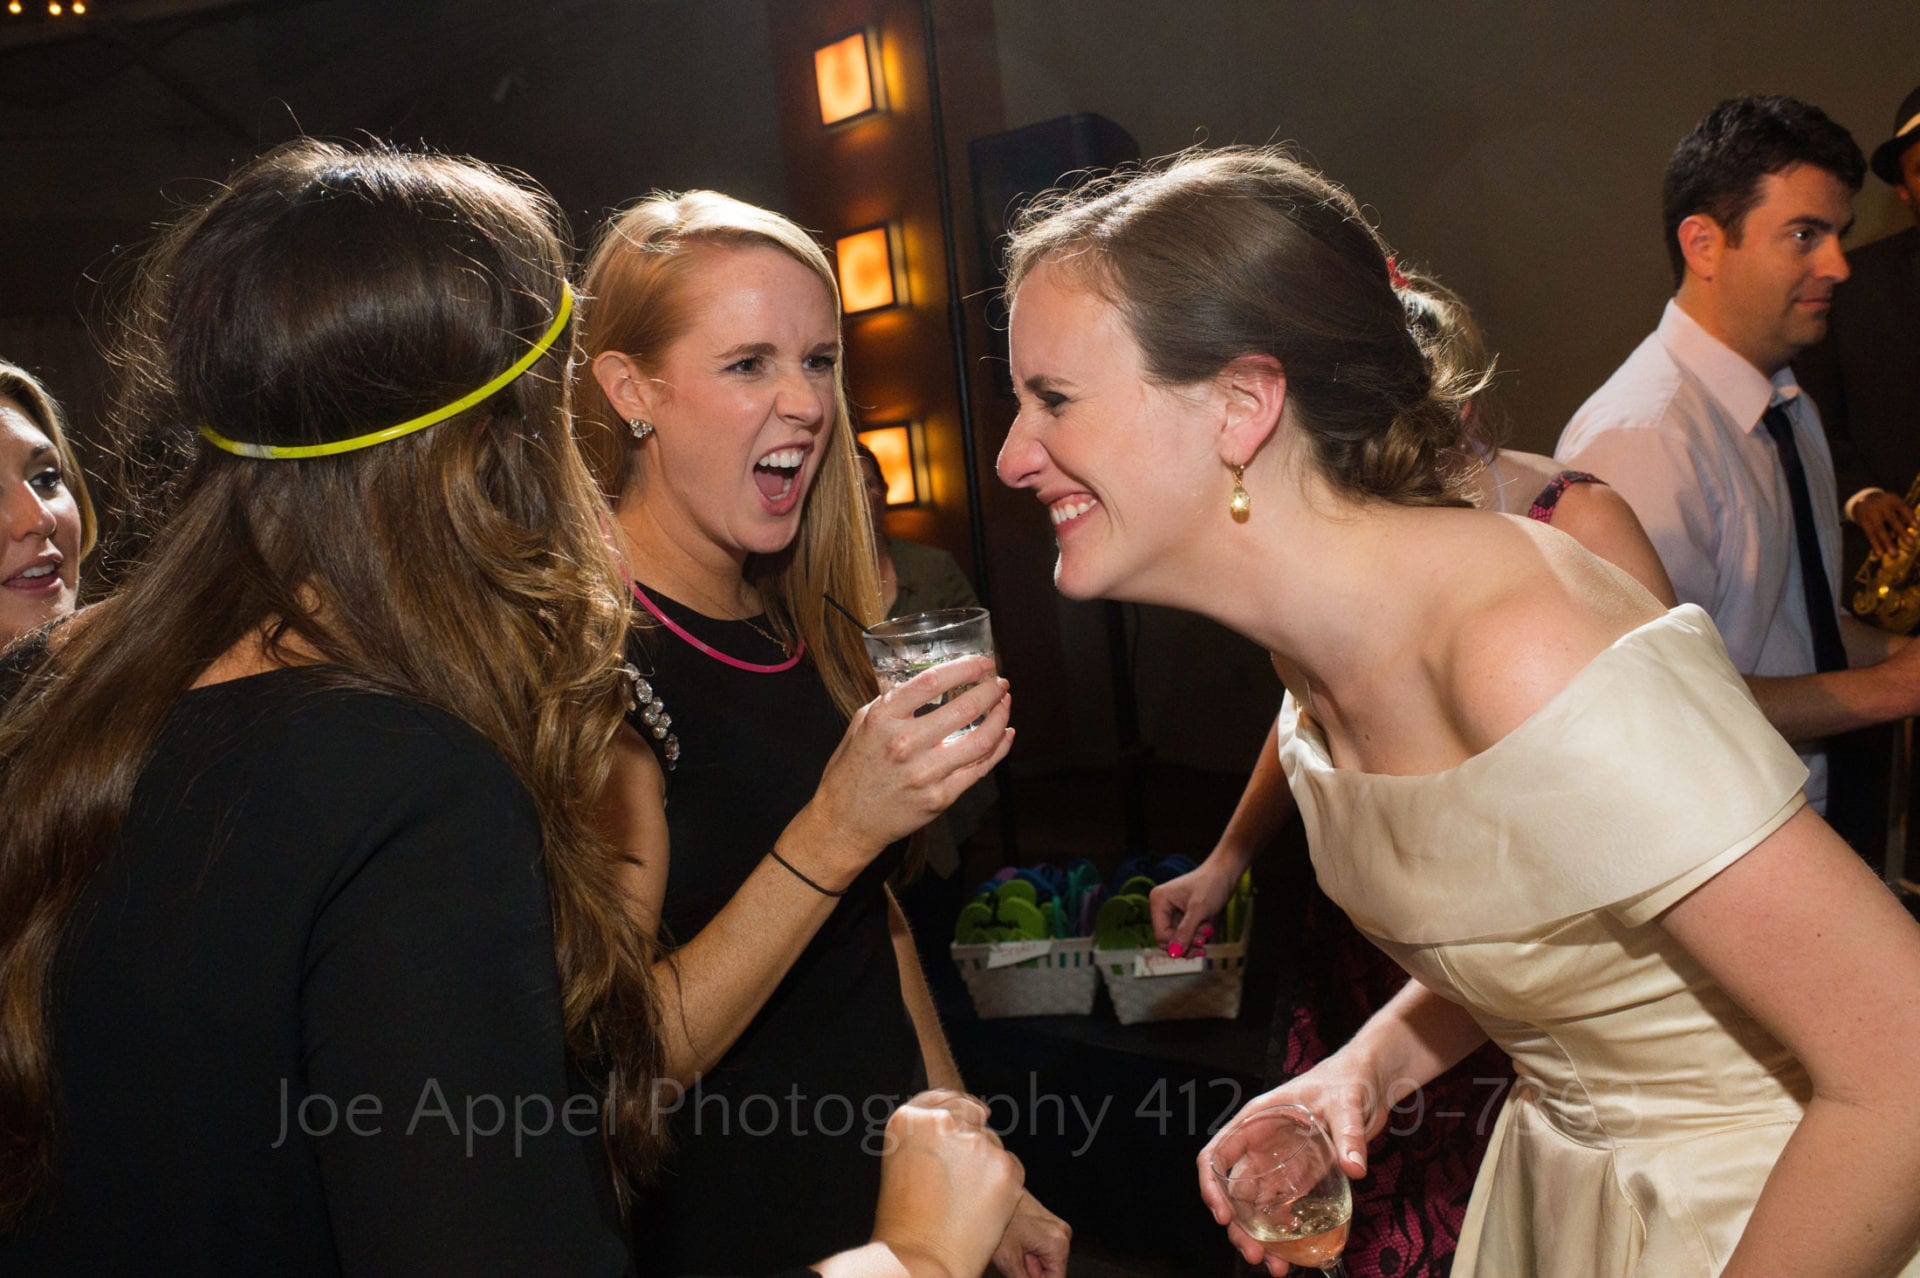 A bride smiles as she dances with two female friends one of who is yelling and holding a glass of liquor during a Heinz History Center wedding